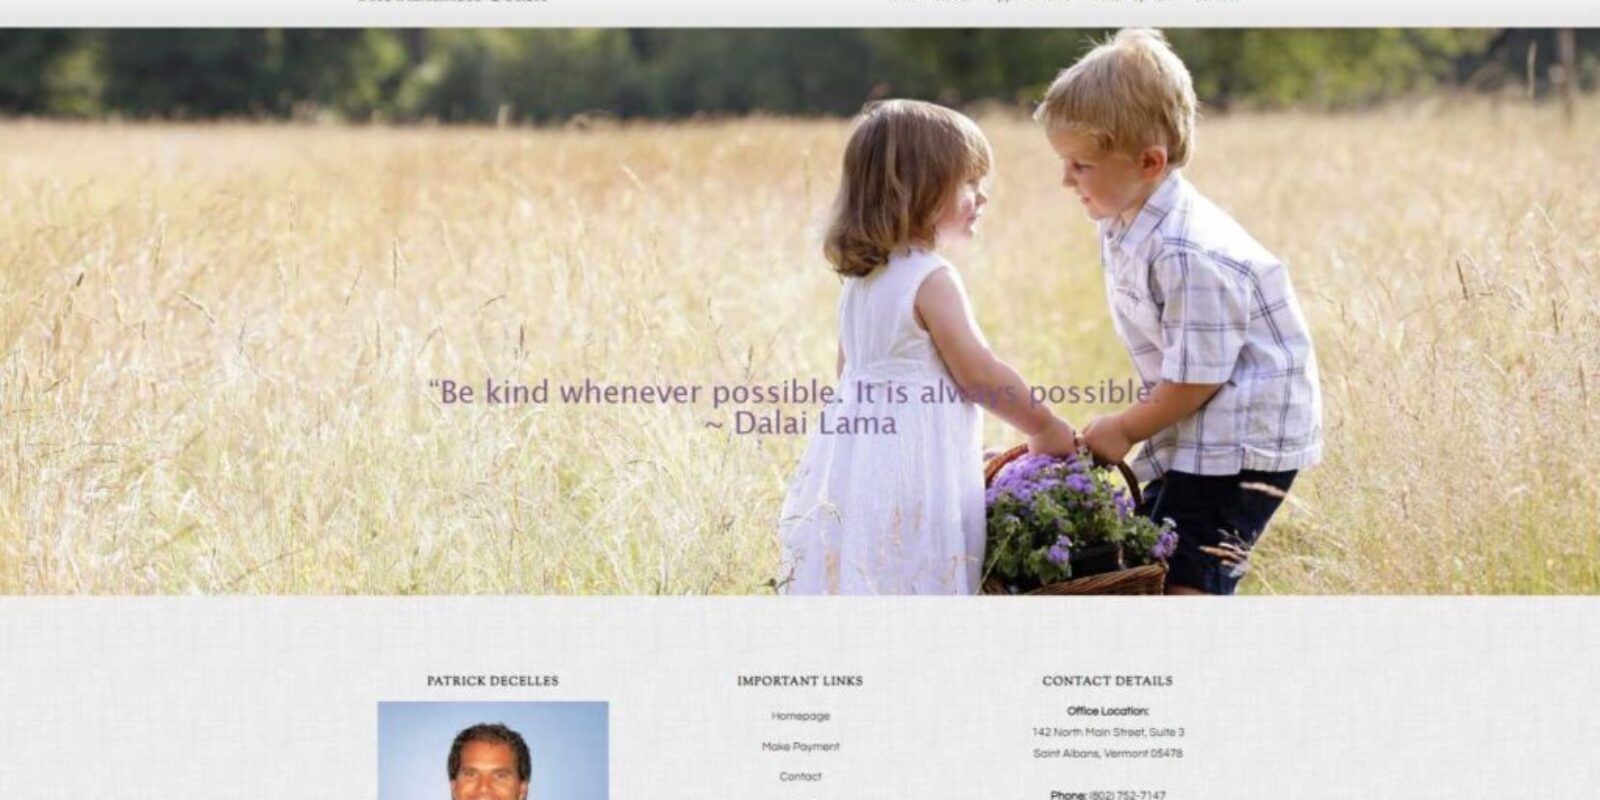 website-completed:-kindness-coach-vermont